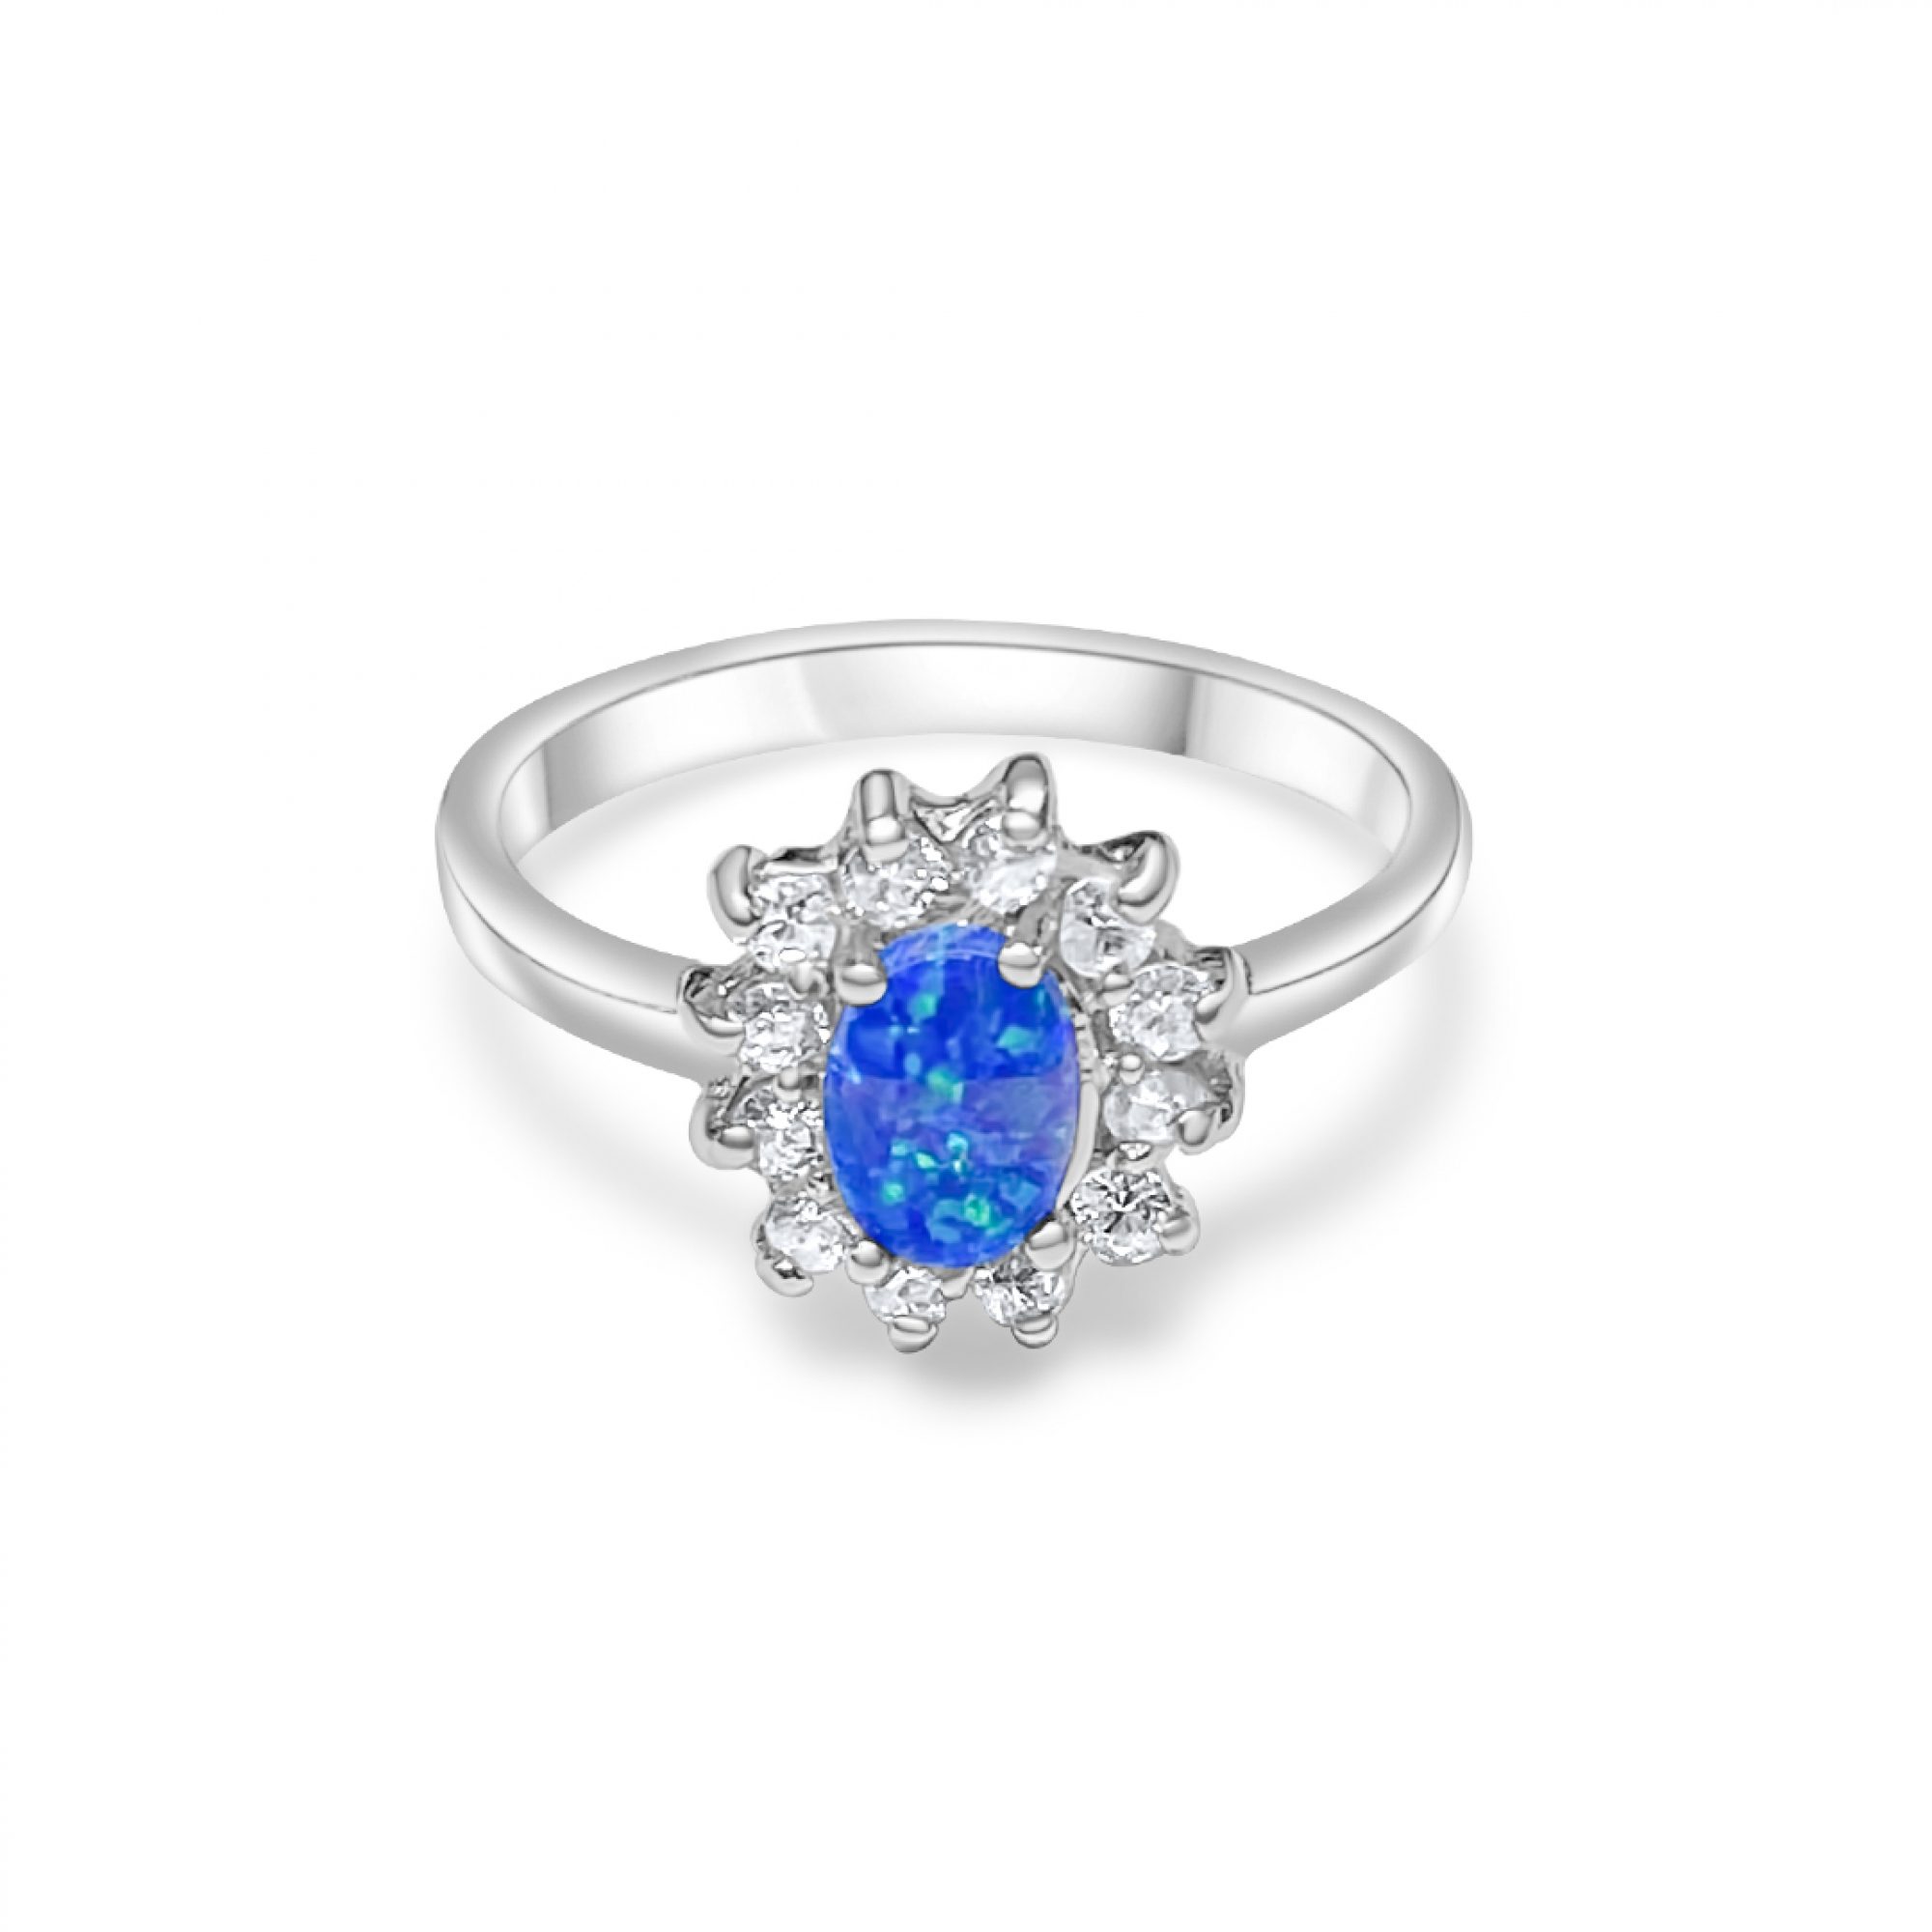 Silver ring with opal and zircon stones 